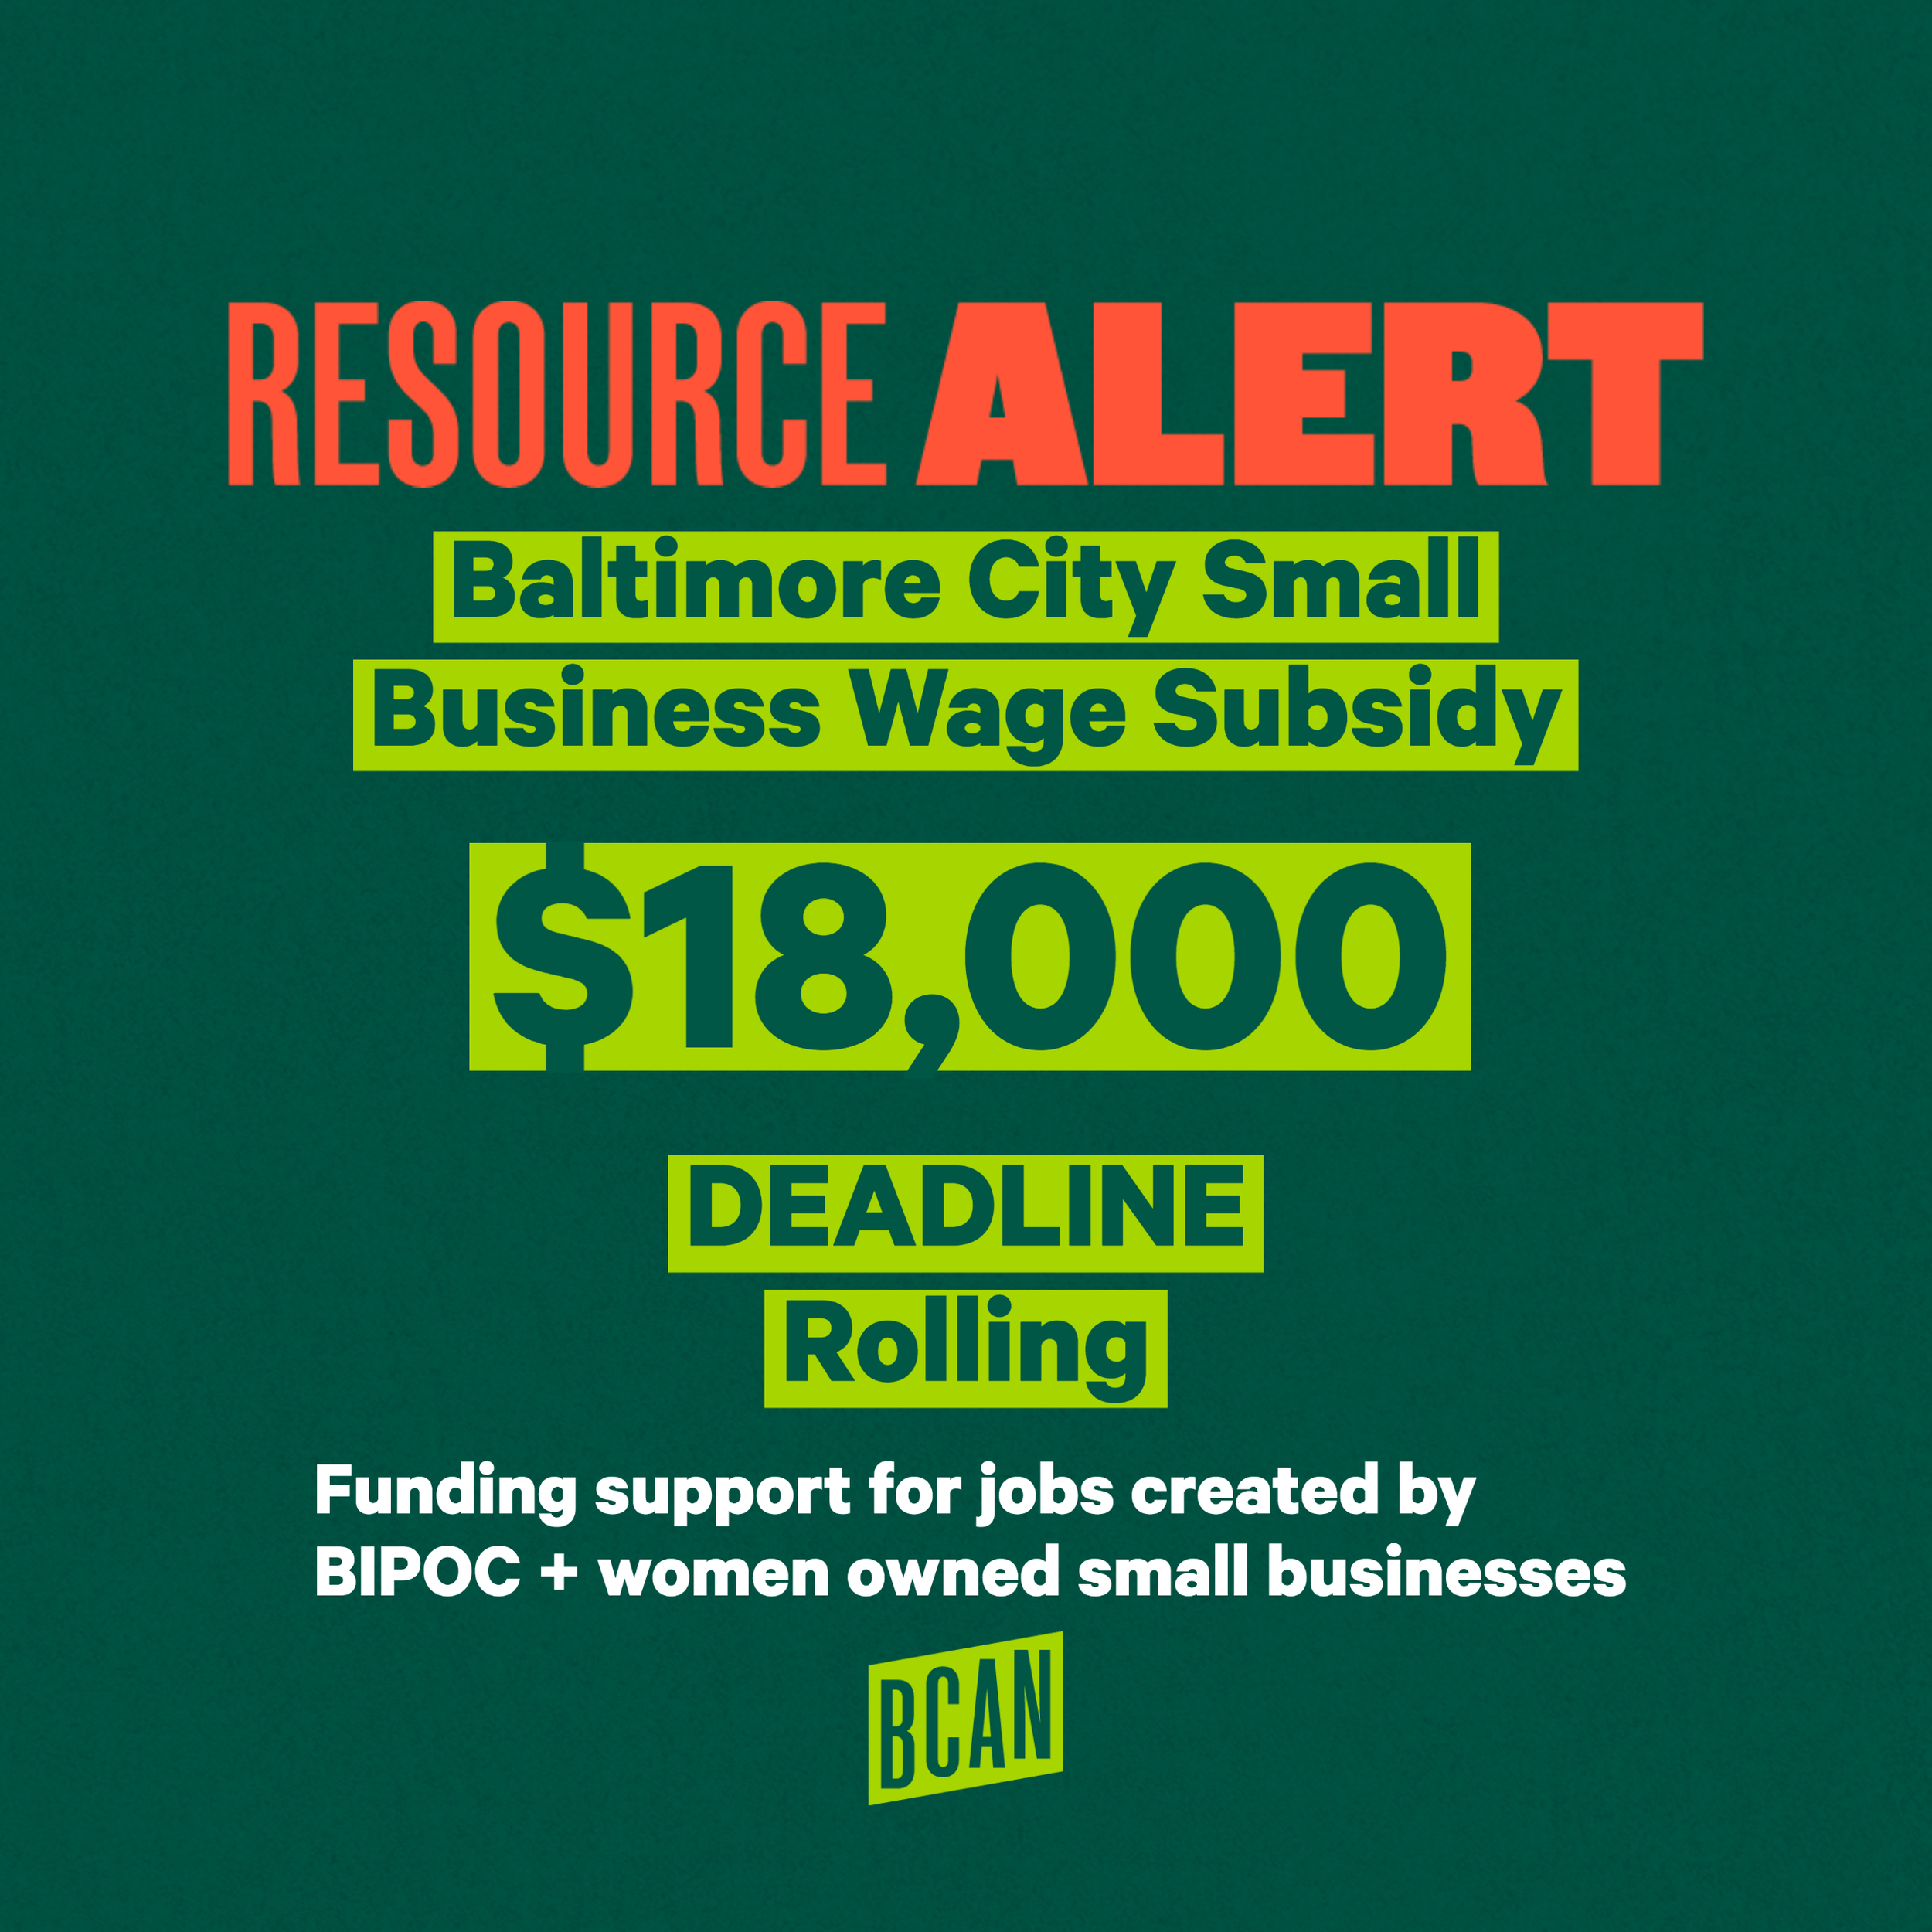 Baltimore City Small Business Wage Subsidy Grants